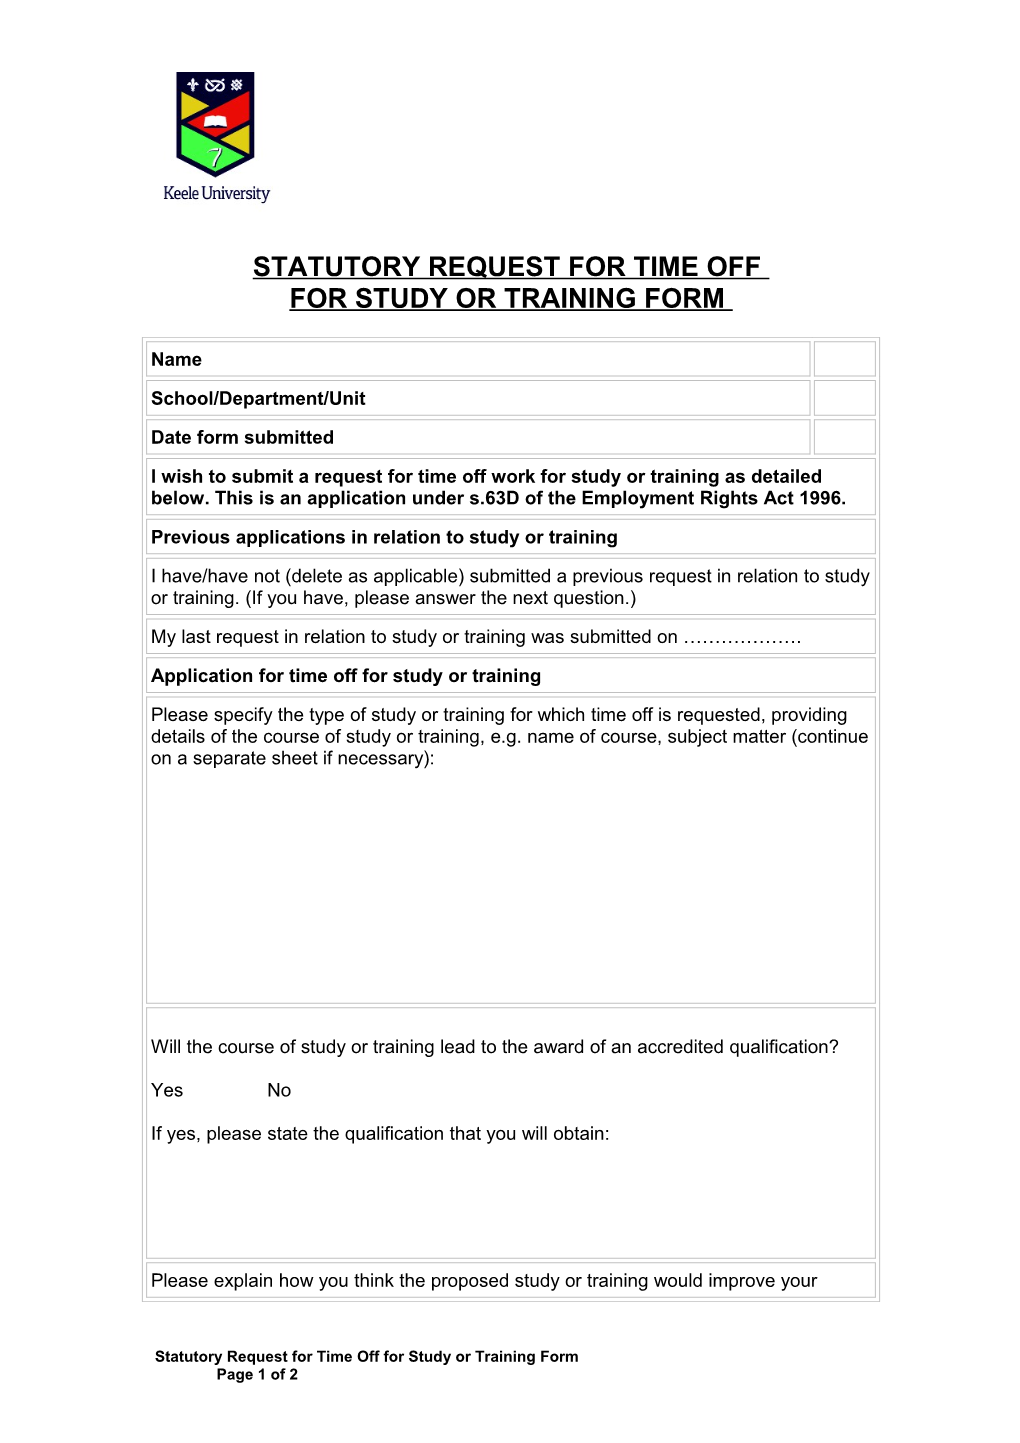 Statutory Request for Study Or Training Form